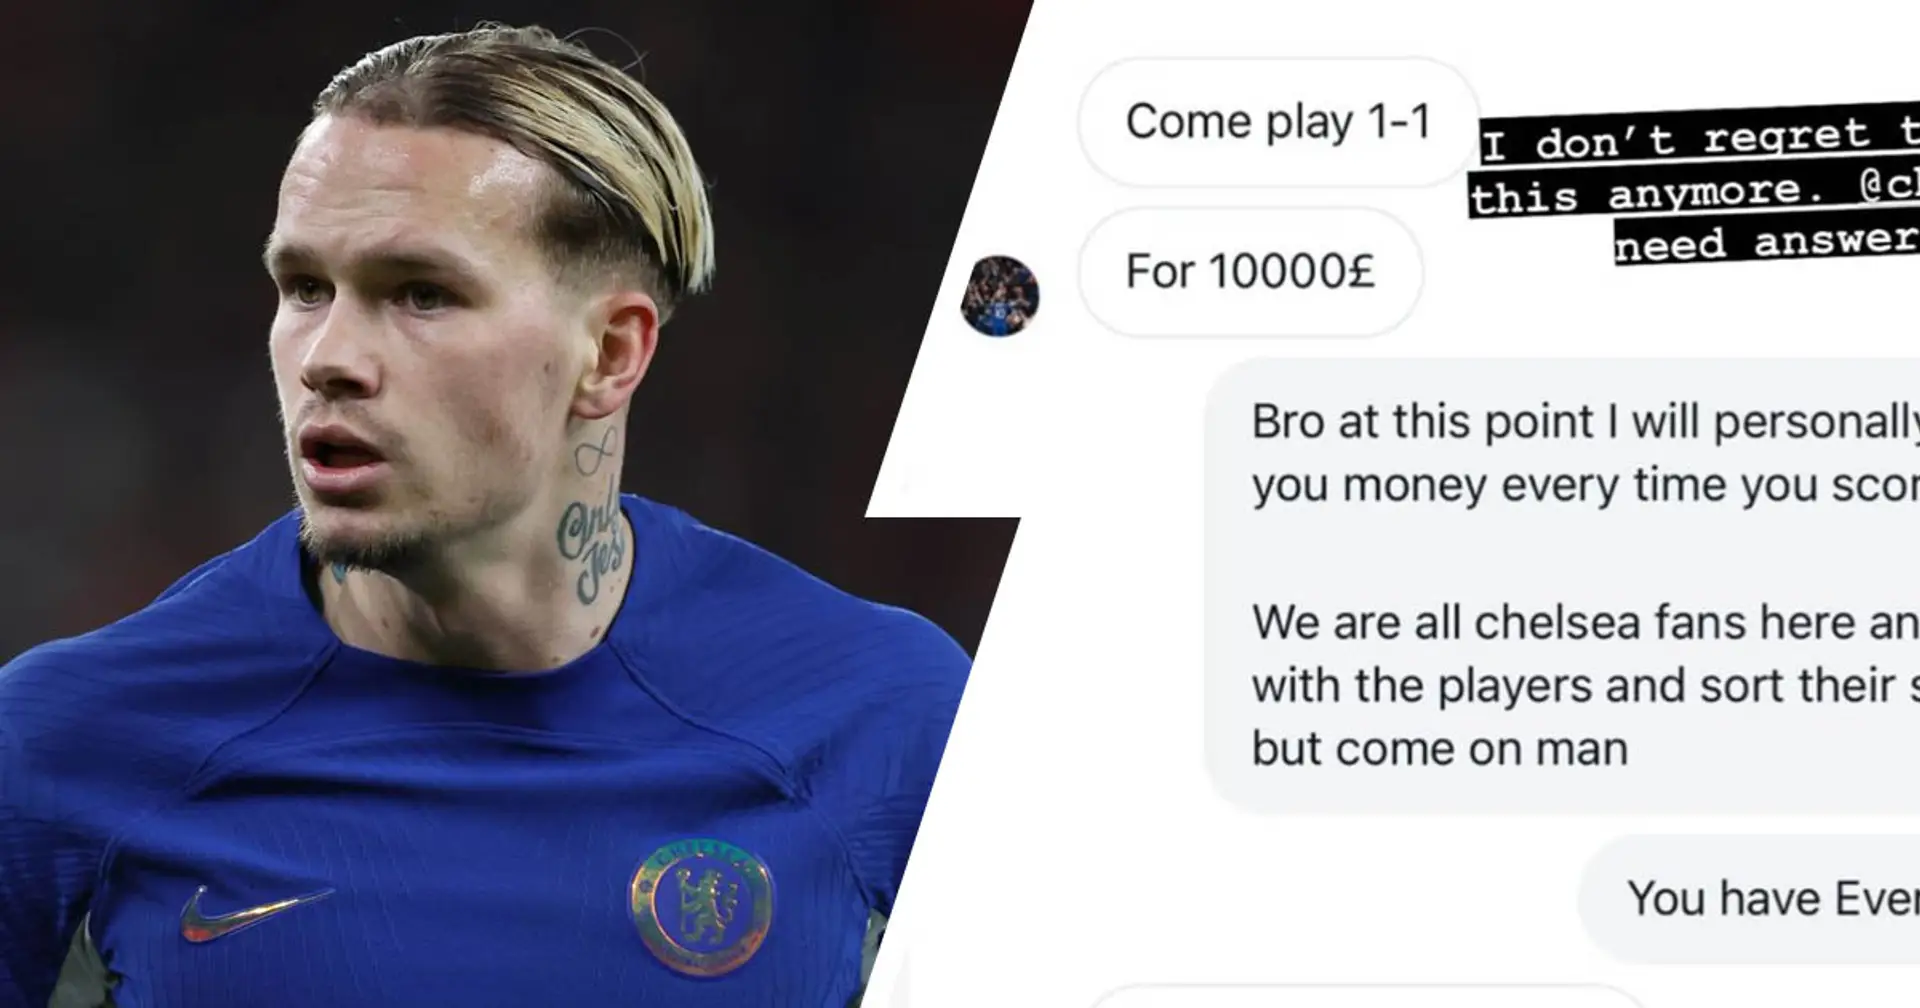 'Come play 1-1 for £10000': Mudryk challenges Chelsea fan on Instagram in response to criticism 